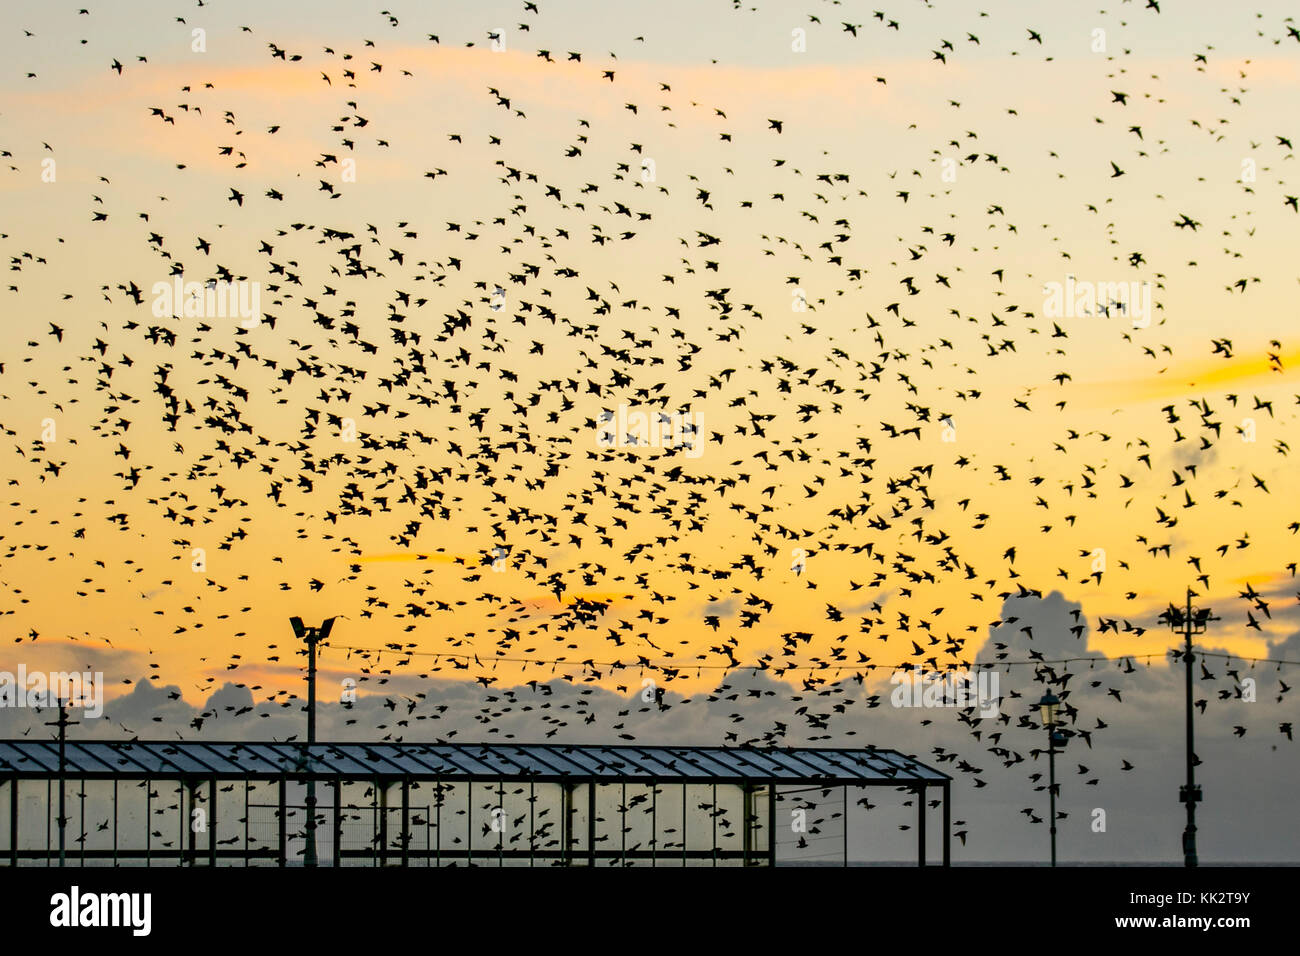 Blackpool, Lancashire, UK 28th November, 2017. UK Weather. Spectacular Starling flocks mumurate at sunset as thousands of starlings gather at the onset of a cold northerly winds on the west coast.   Regulated by in inbuilt light meter these flocks assemble, at sunset, from far and wide to john a communal roost under the North Pier. The murmur or chatter, the interaction between the huge numbers as they fly, is quite intense and is thought to form part of a communication of sorts. Credit. MediaWorldImages/AlamyLiveNews Stock Photo